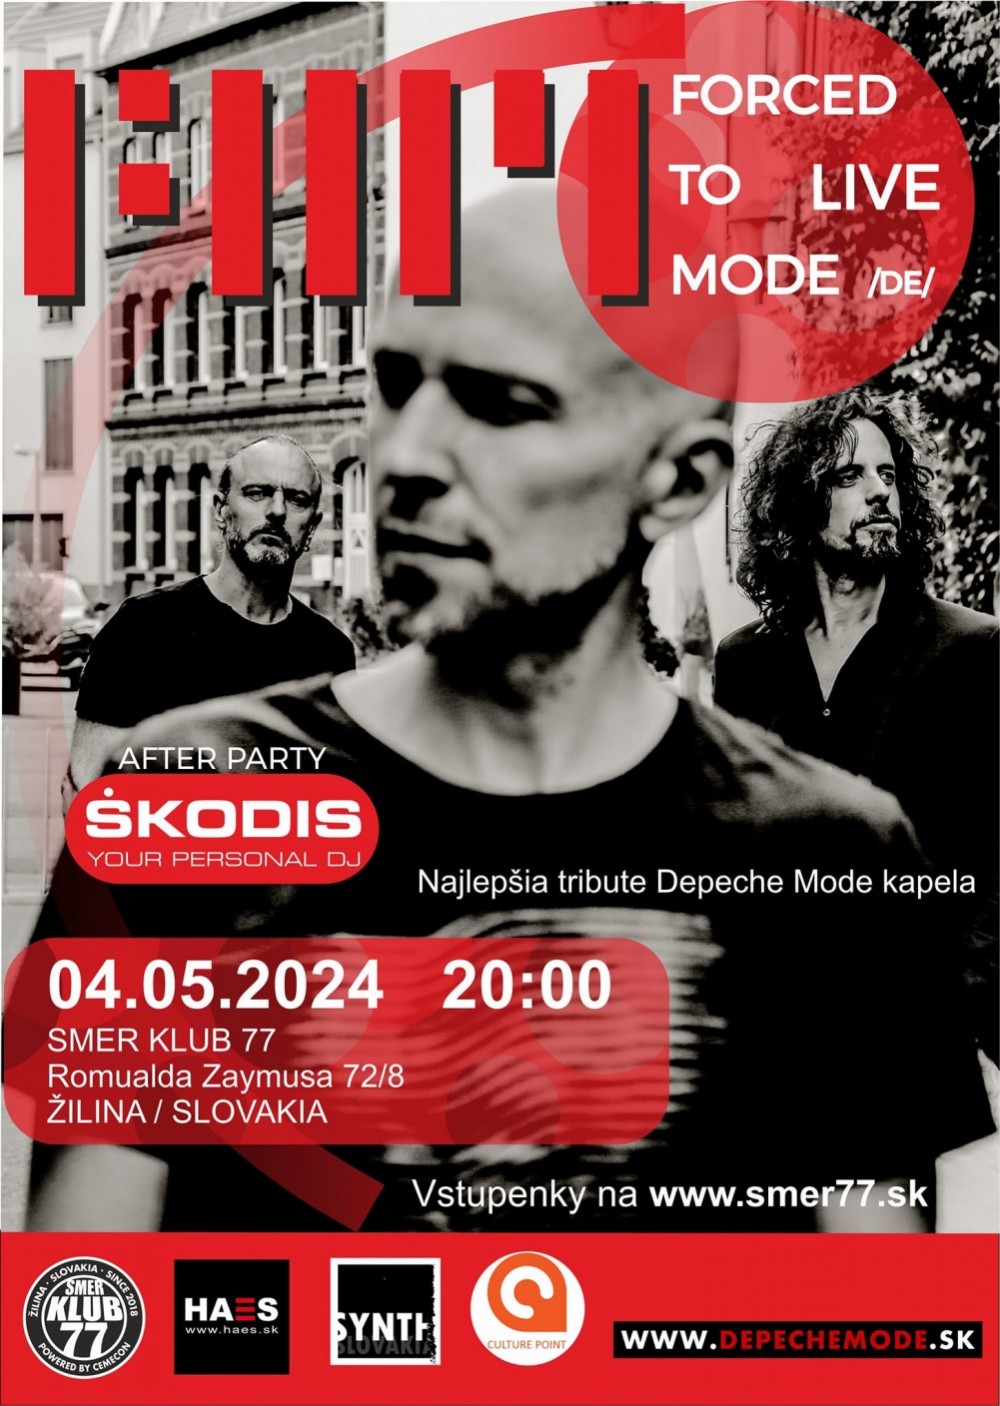 Plagát akcie: koncert Forced To Mode + Depeche Mode Party